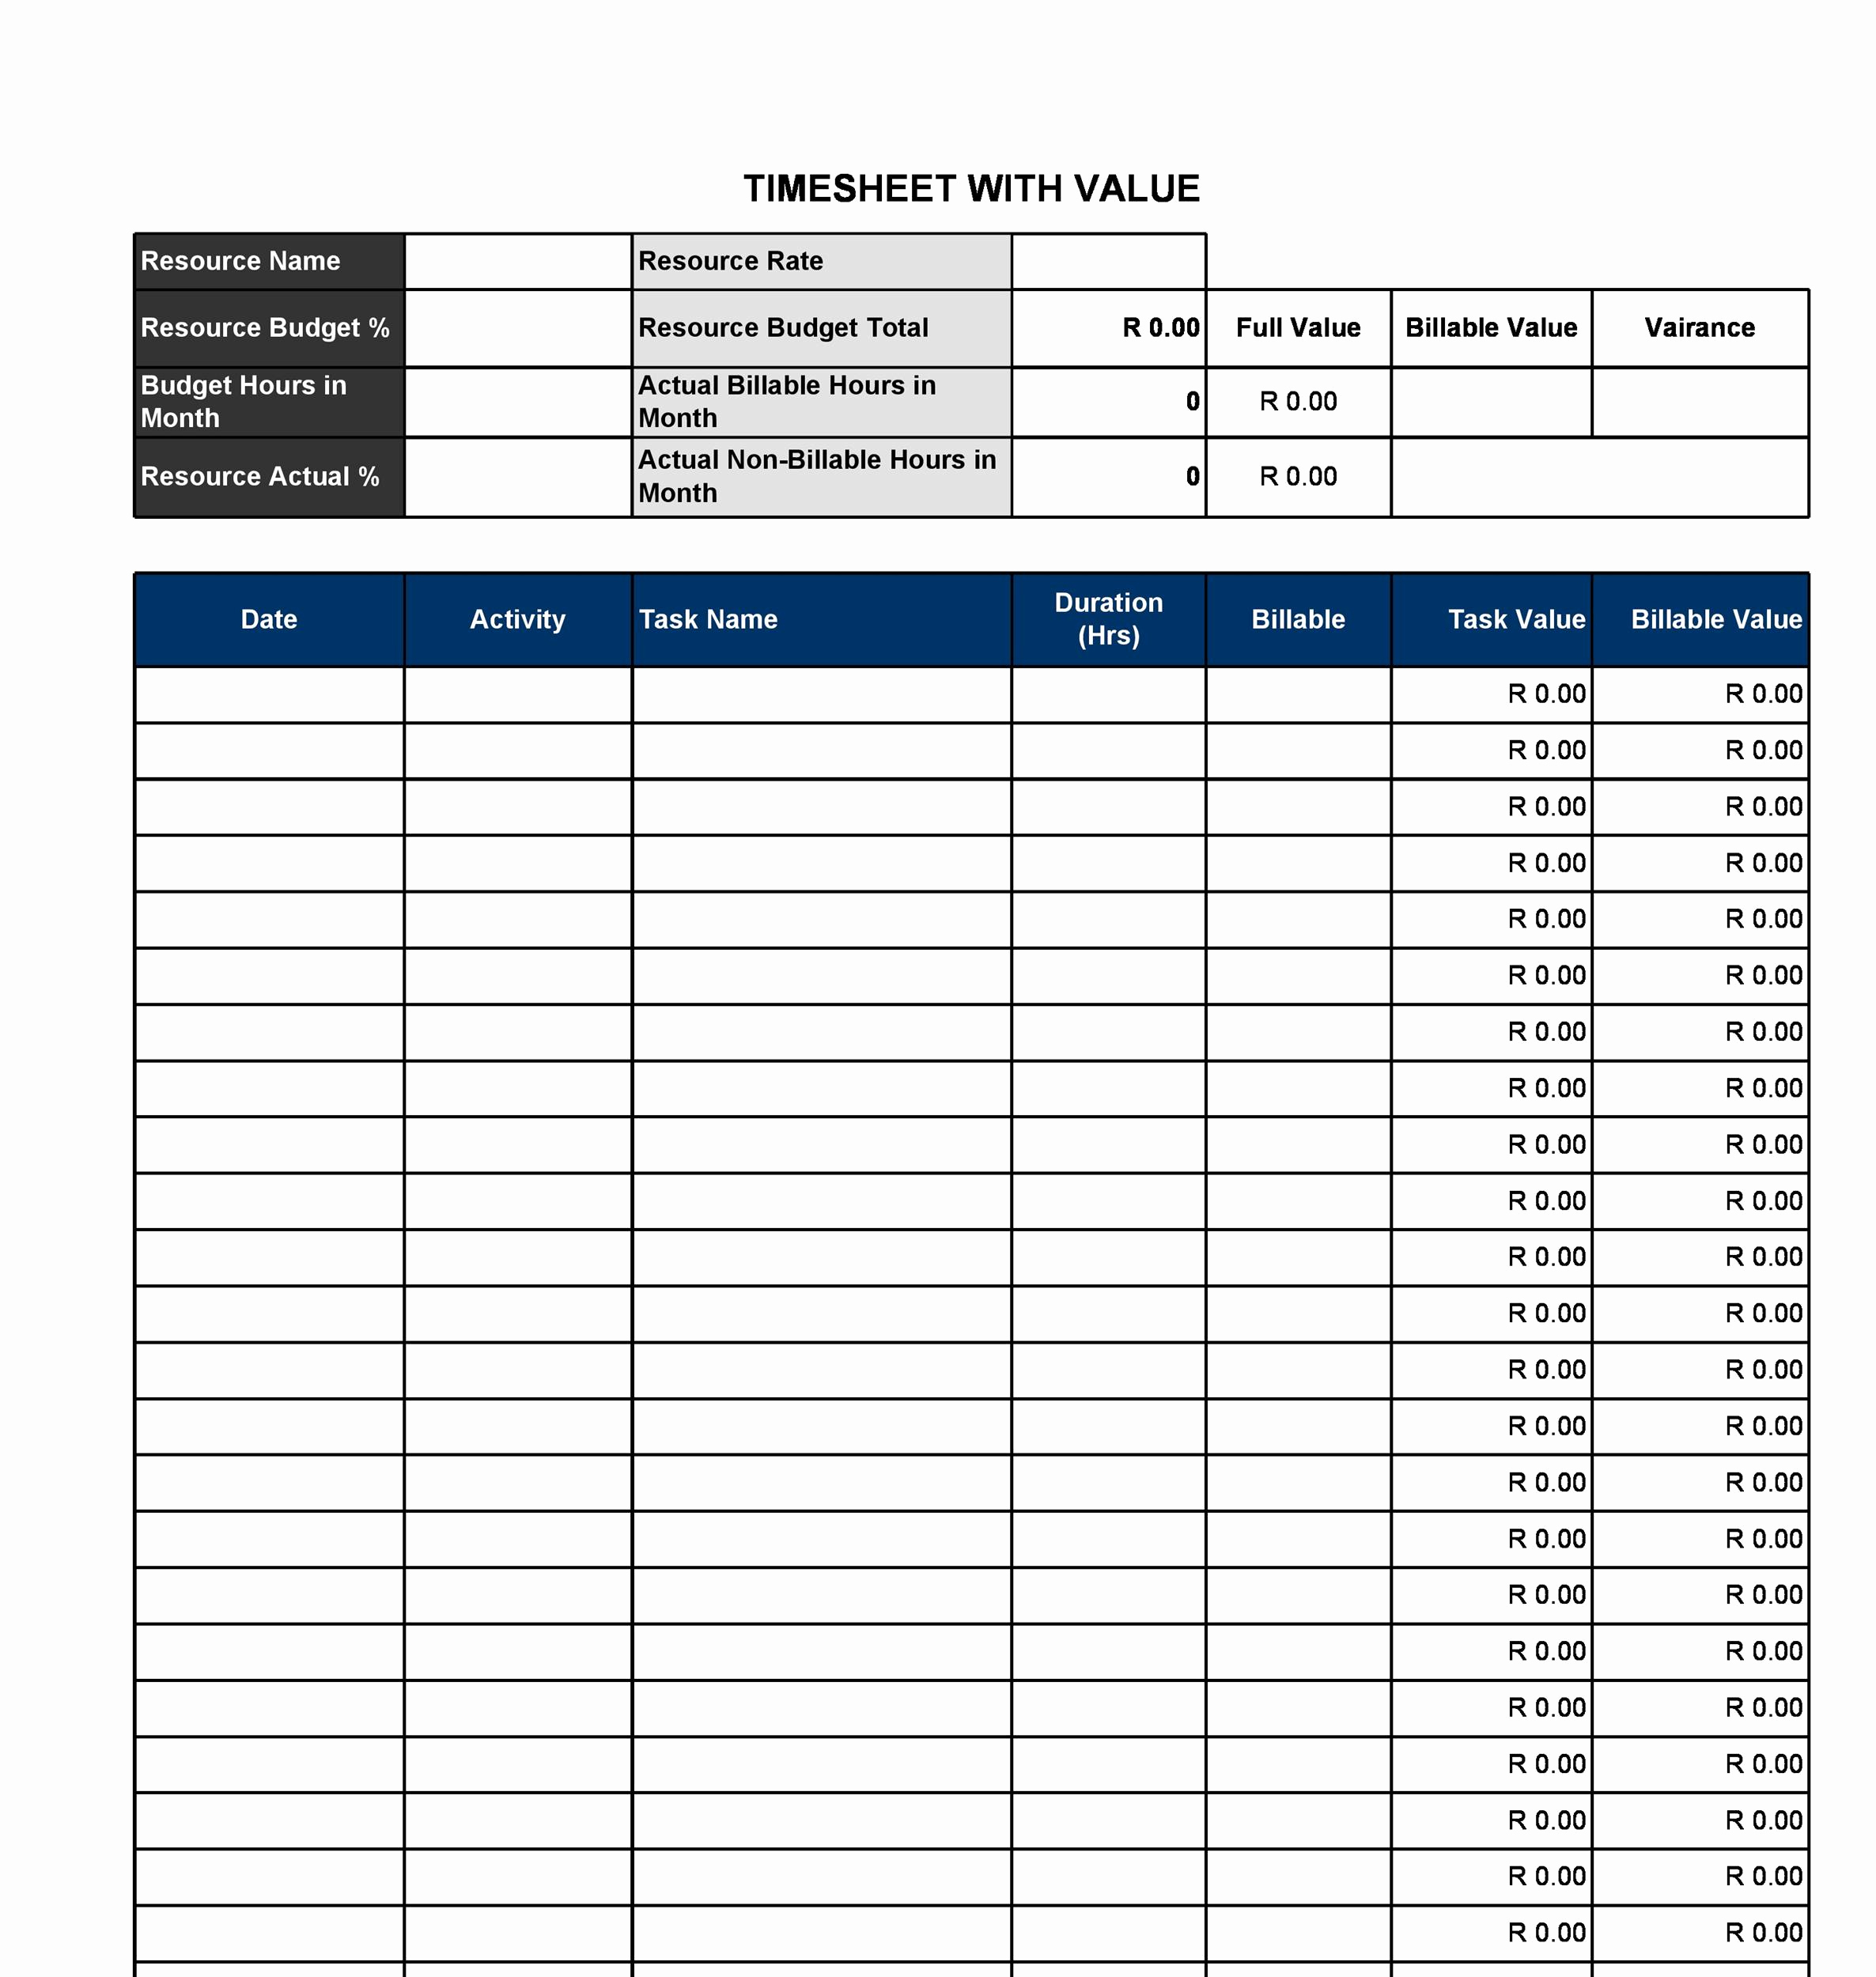 Excel Timesheet Template With Tasks Tangseshihtzu.se intended for 40 Free Employee Schedule Templates Excel Word ᐅ